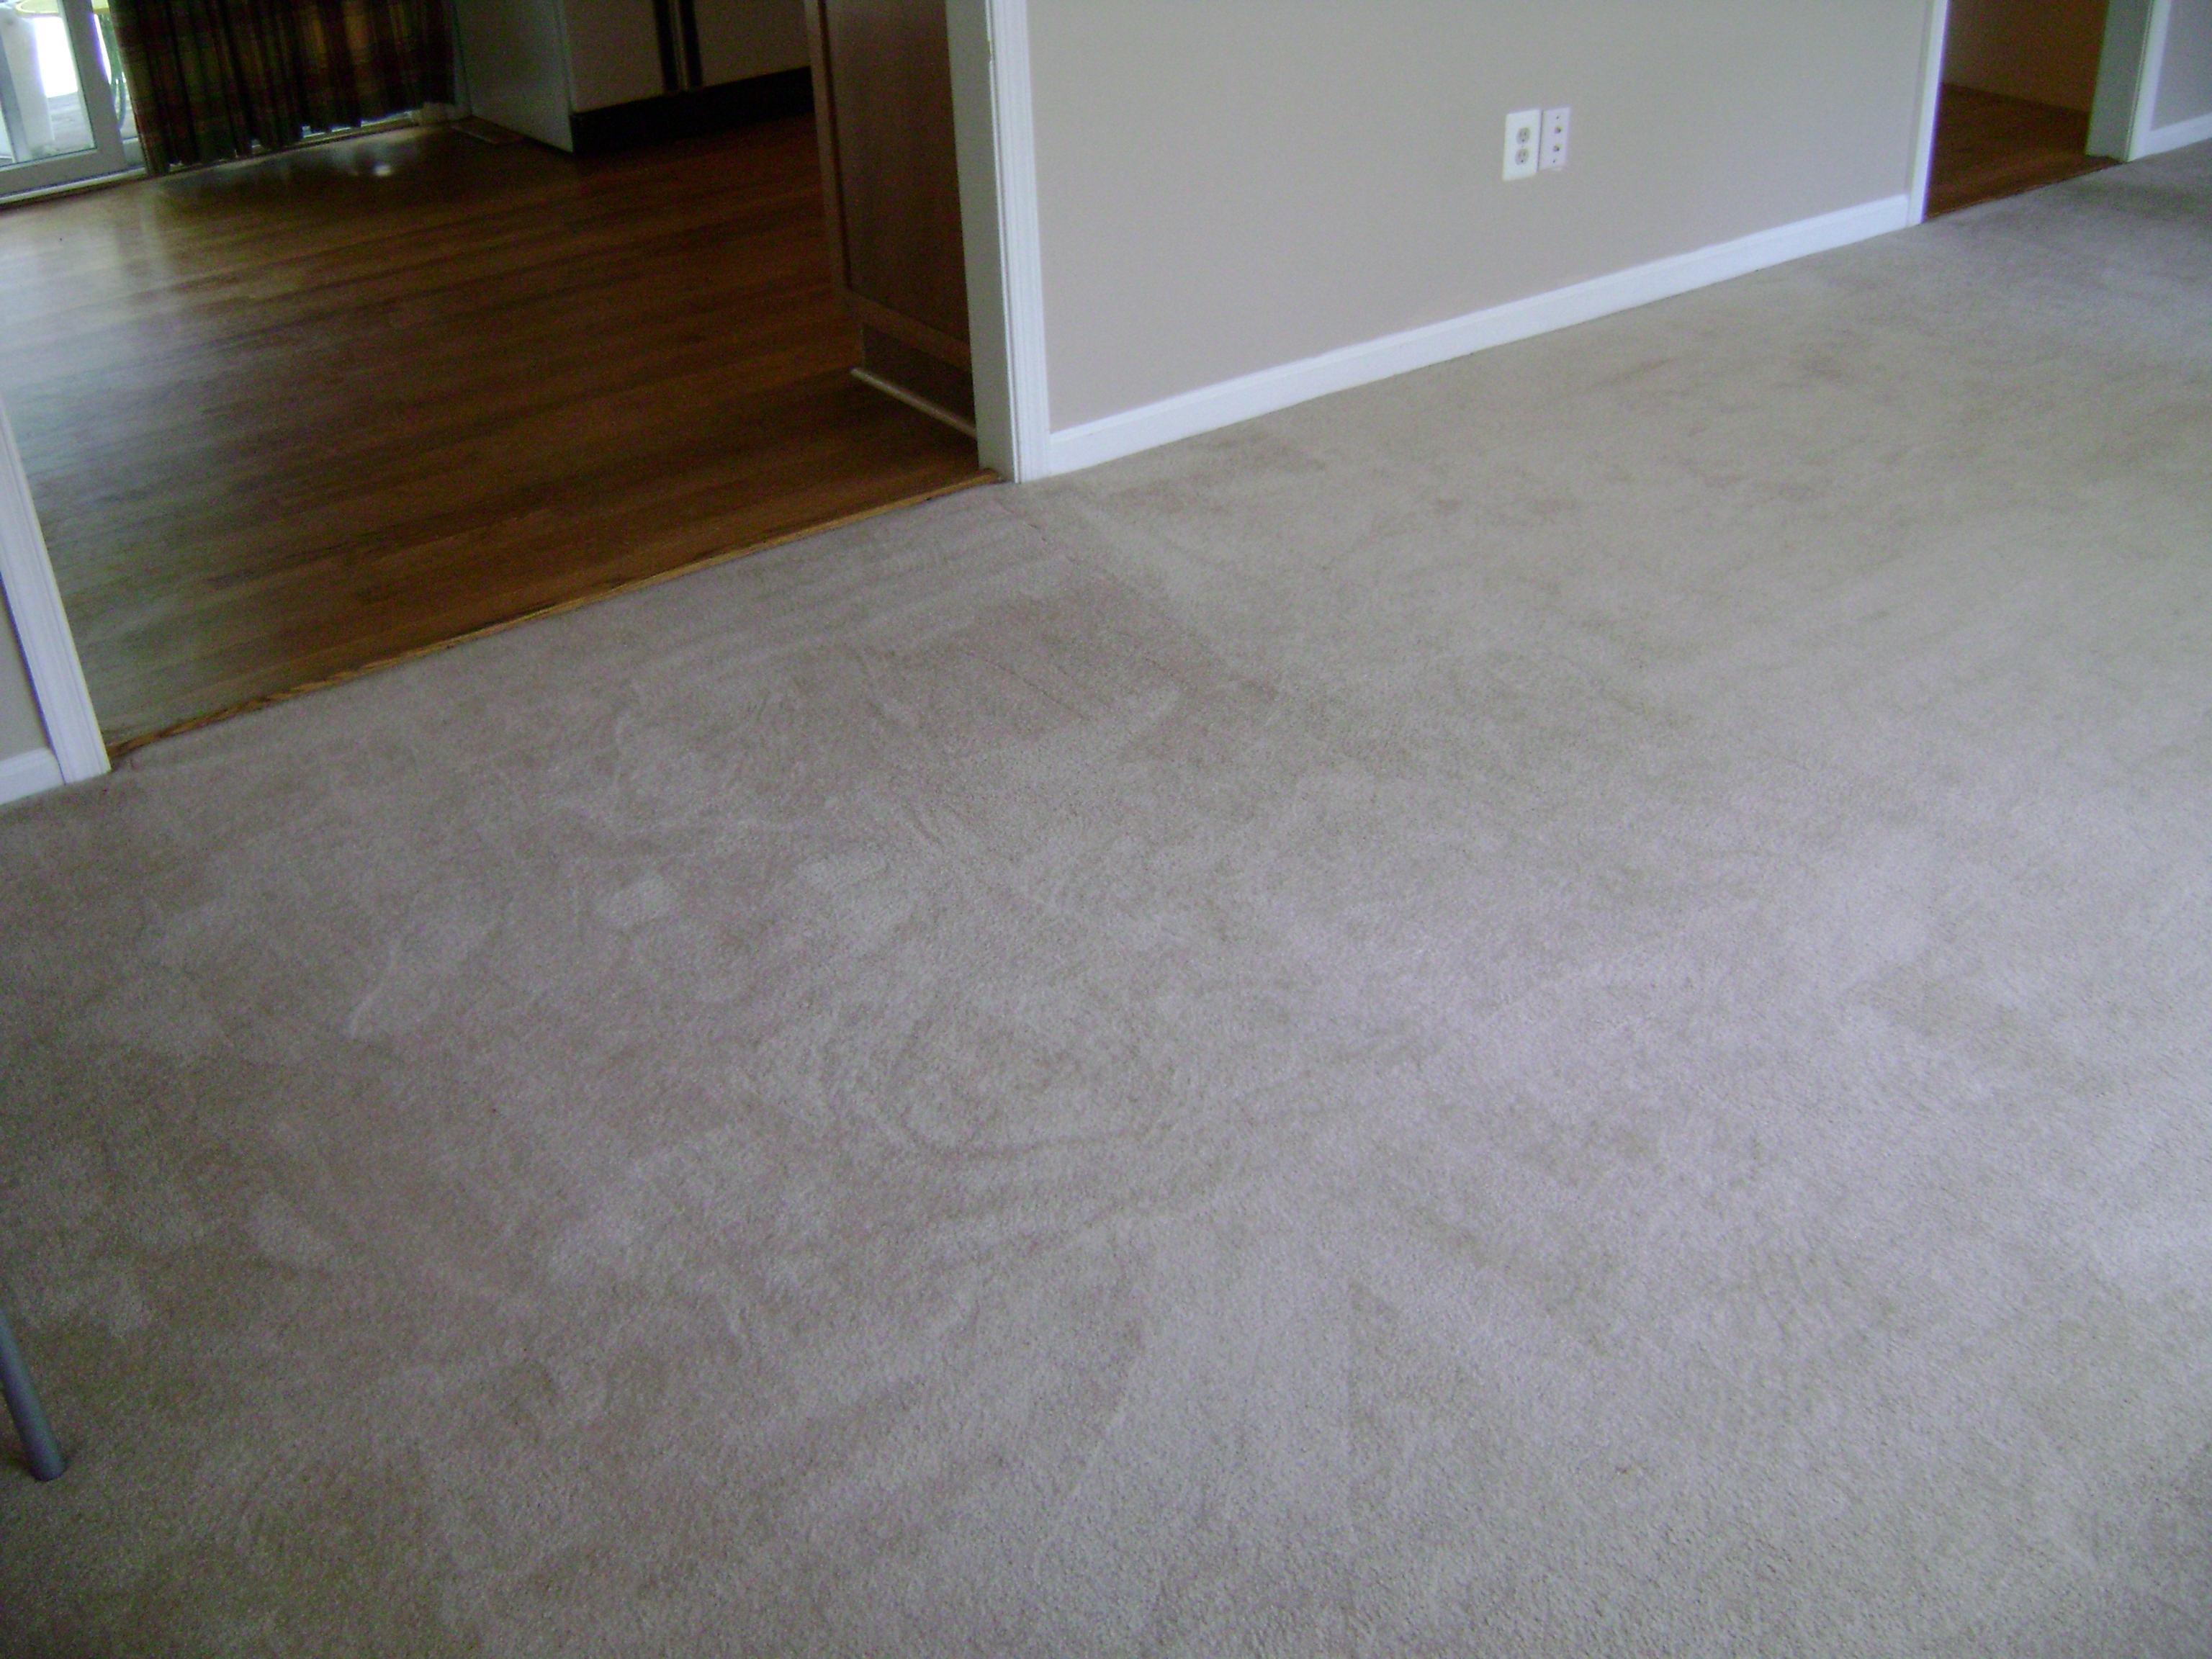 After A Professional Carpet Cleaning Fairfax Va